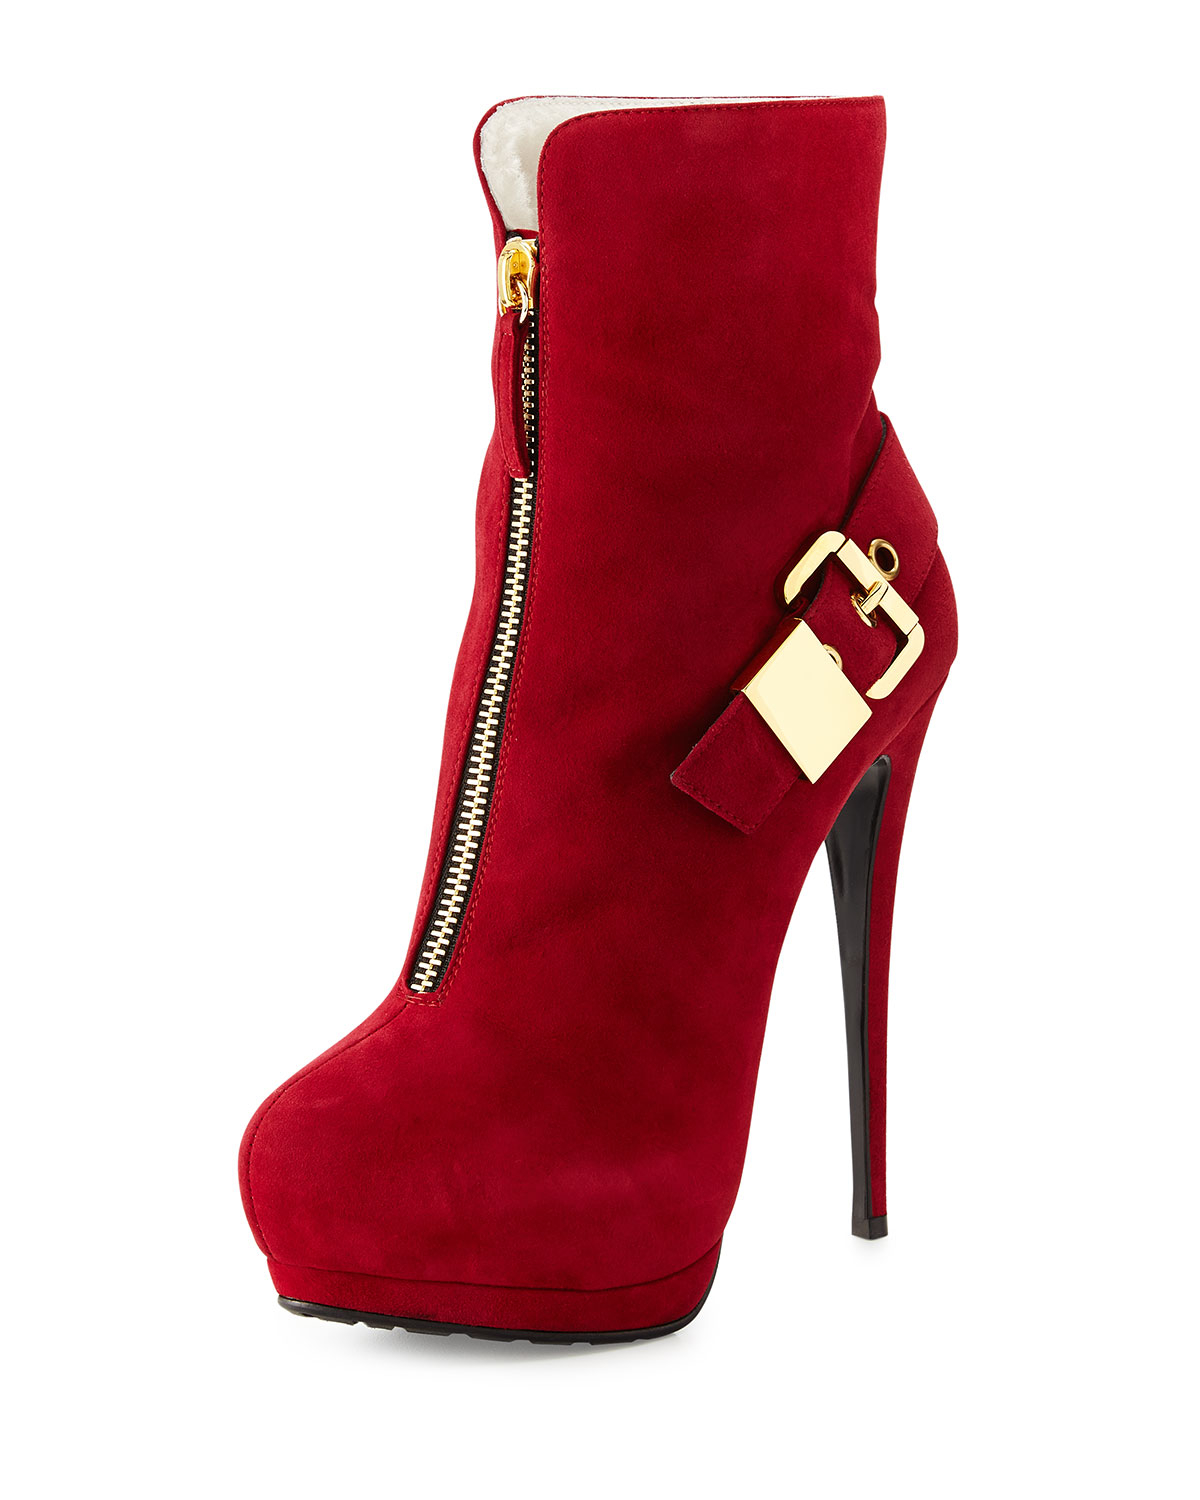 Giuseppe Zanotti Suede Zip-Front Fur-Lined Bootie in Red - Lyst